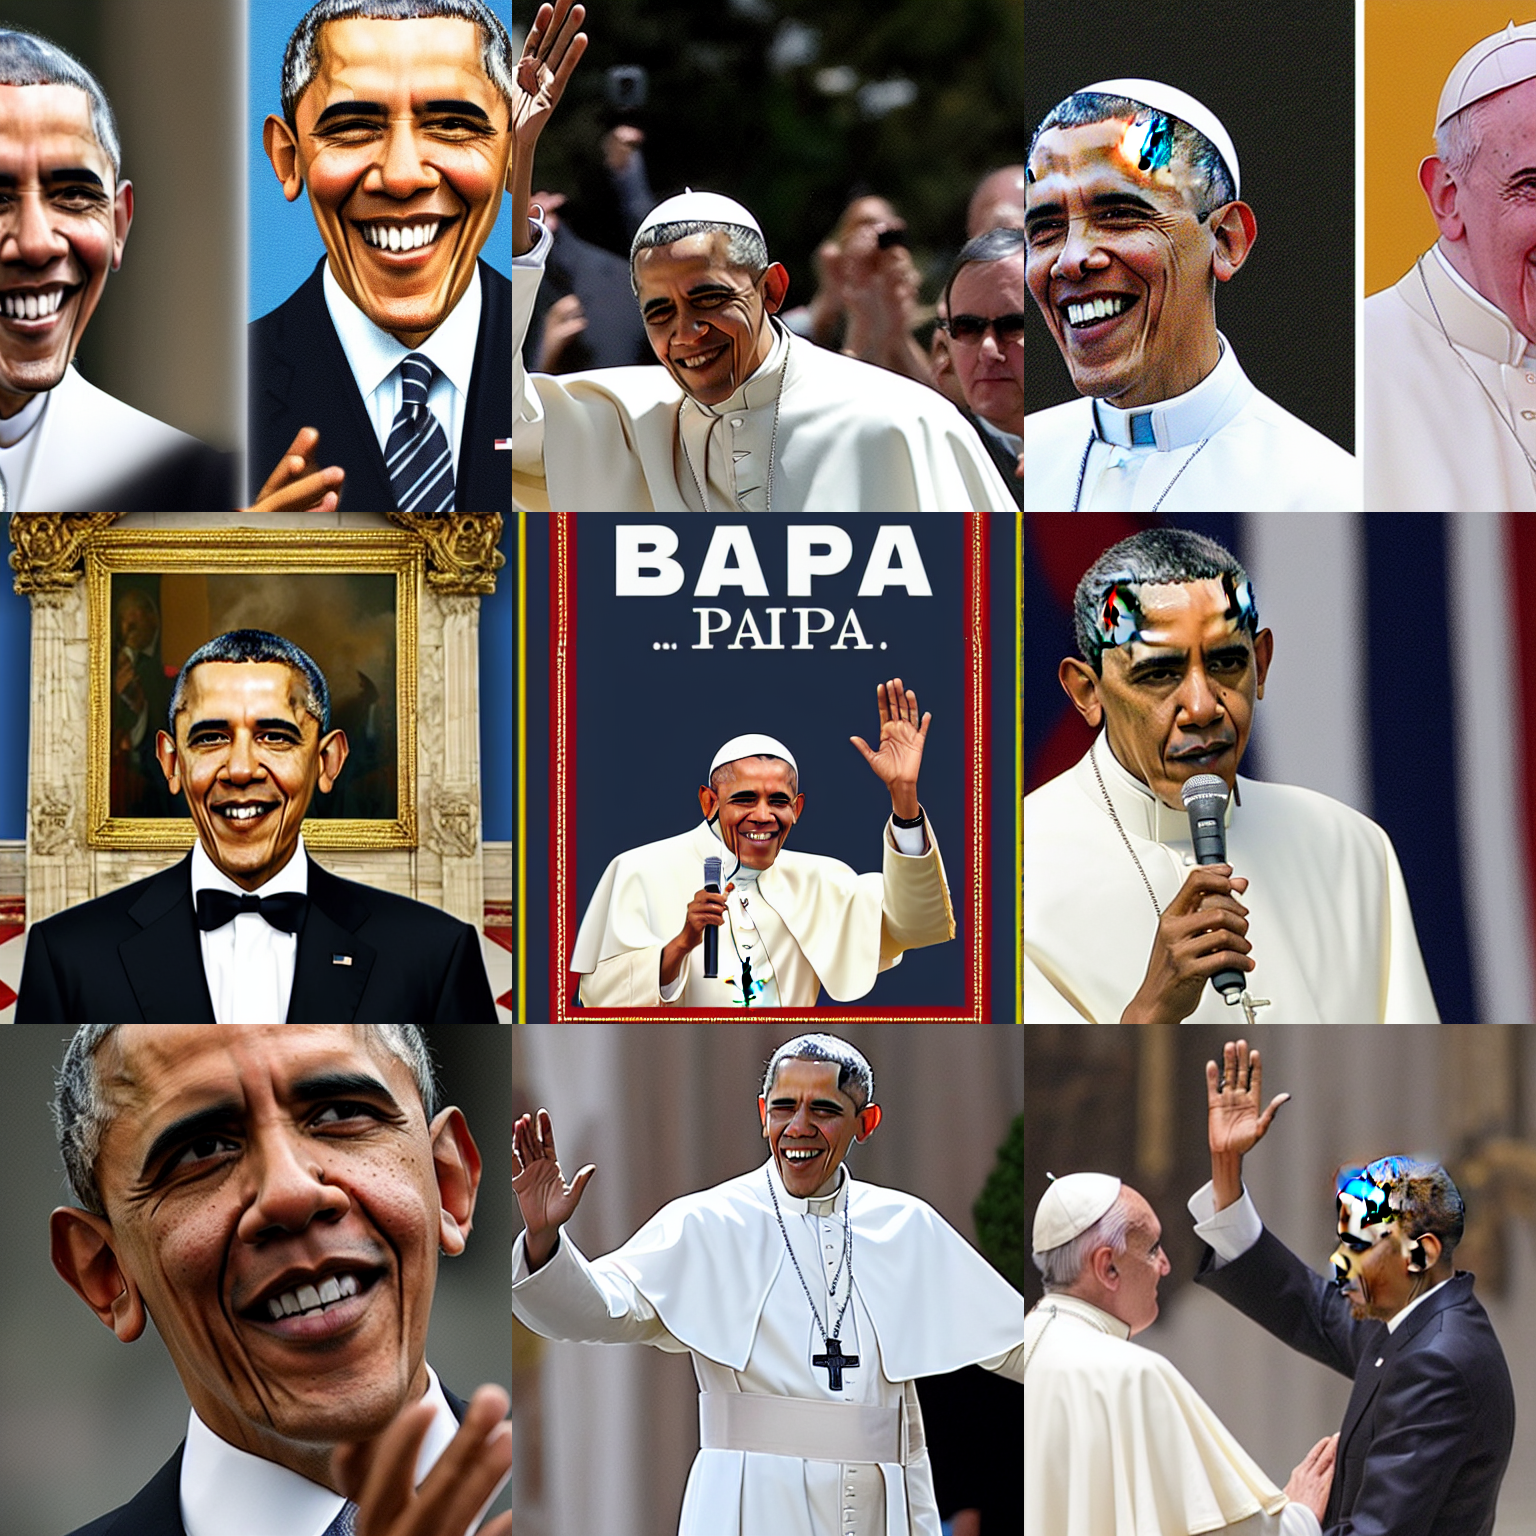 barack obama as the pope